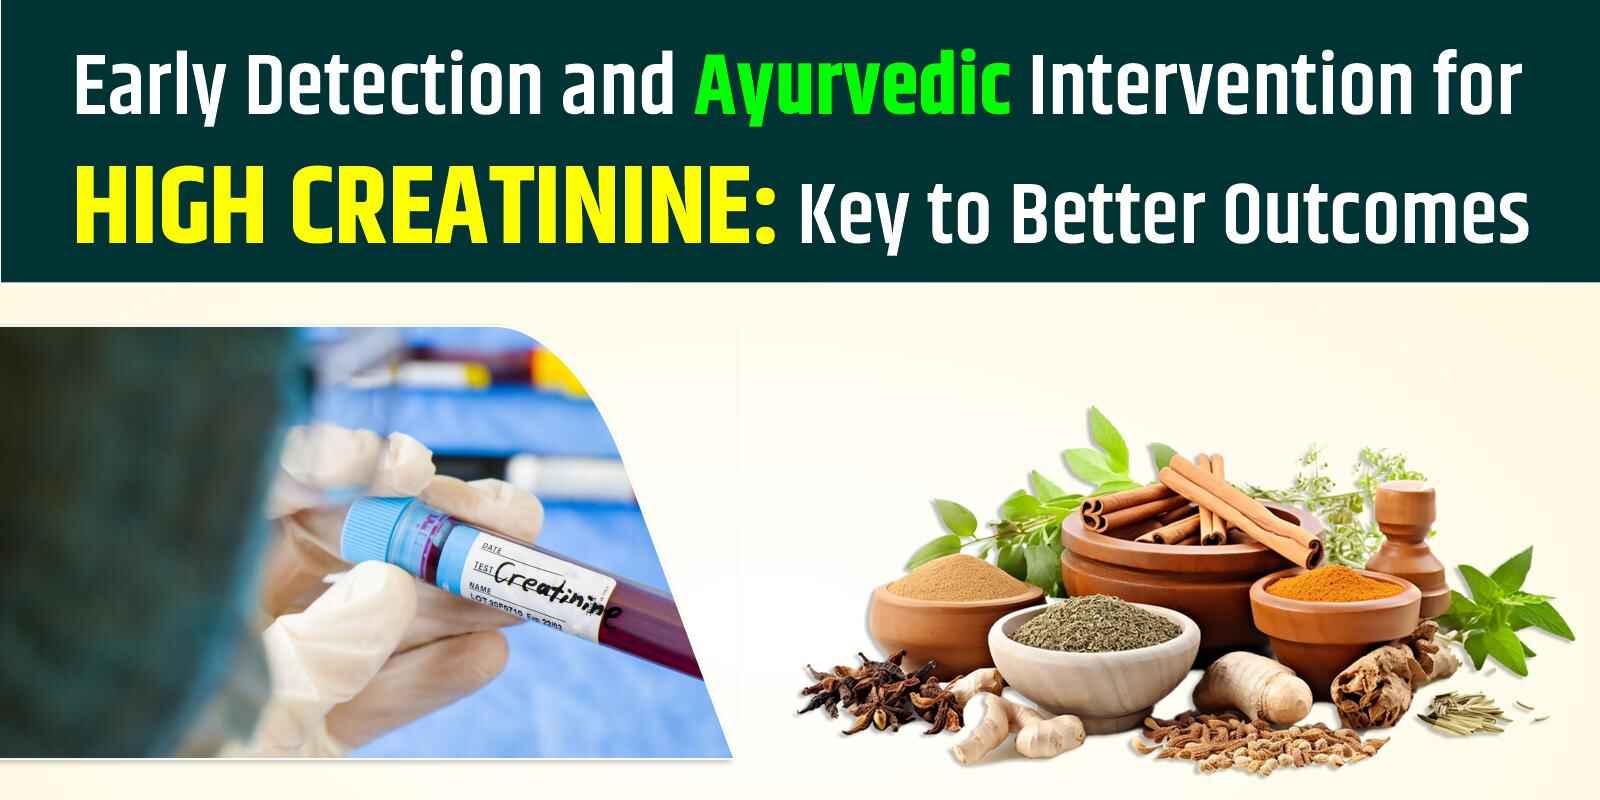 Early Detection and Ayurvedic Intervention for High Creatinine: Key to Better Outcomes